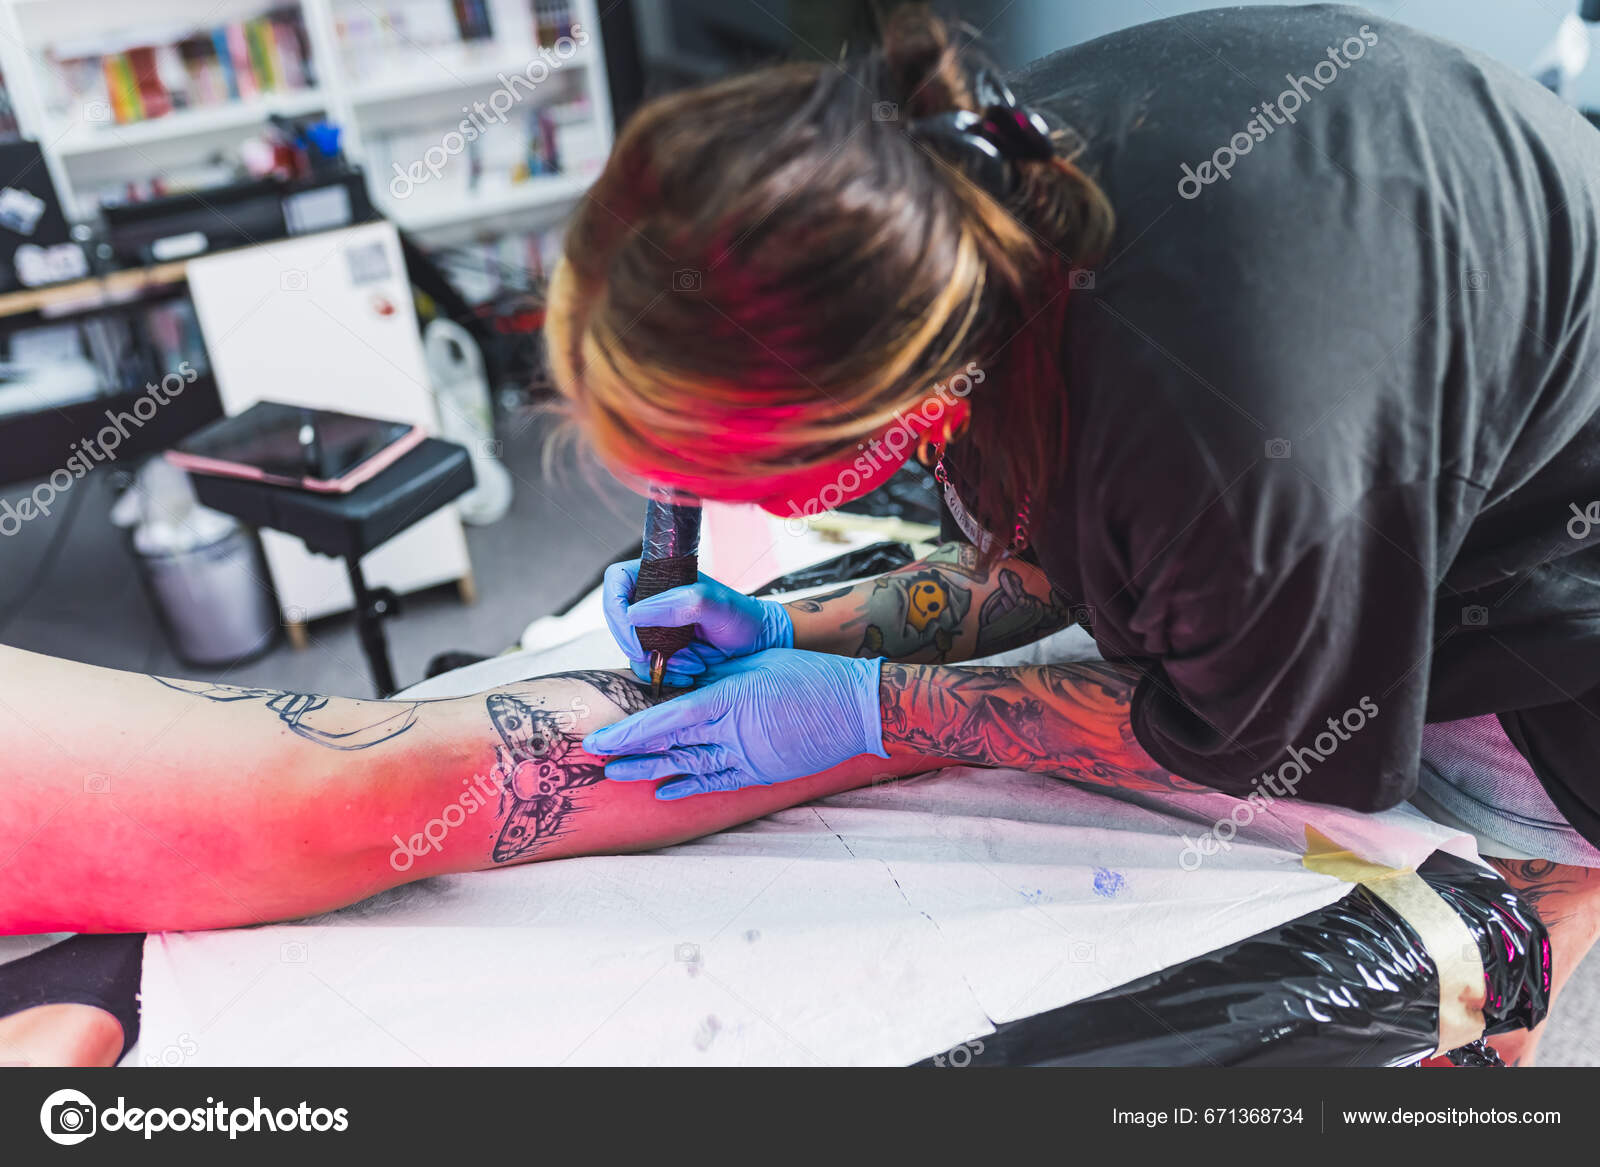 How to Become a Tattoo Artist | Hours, roles & qualifications